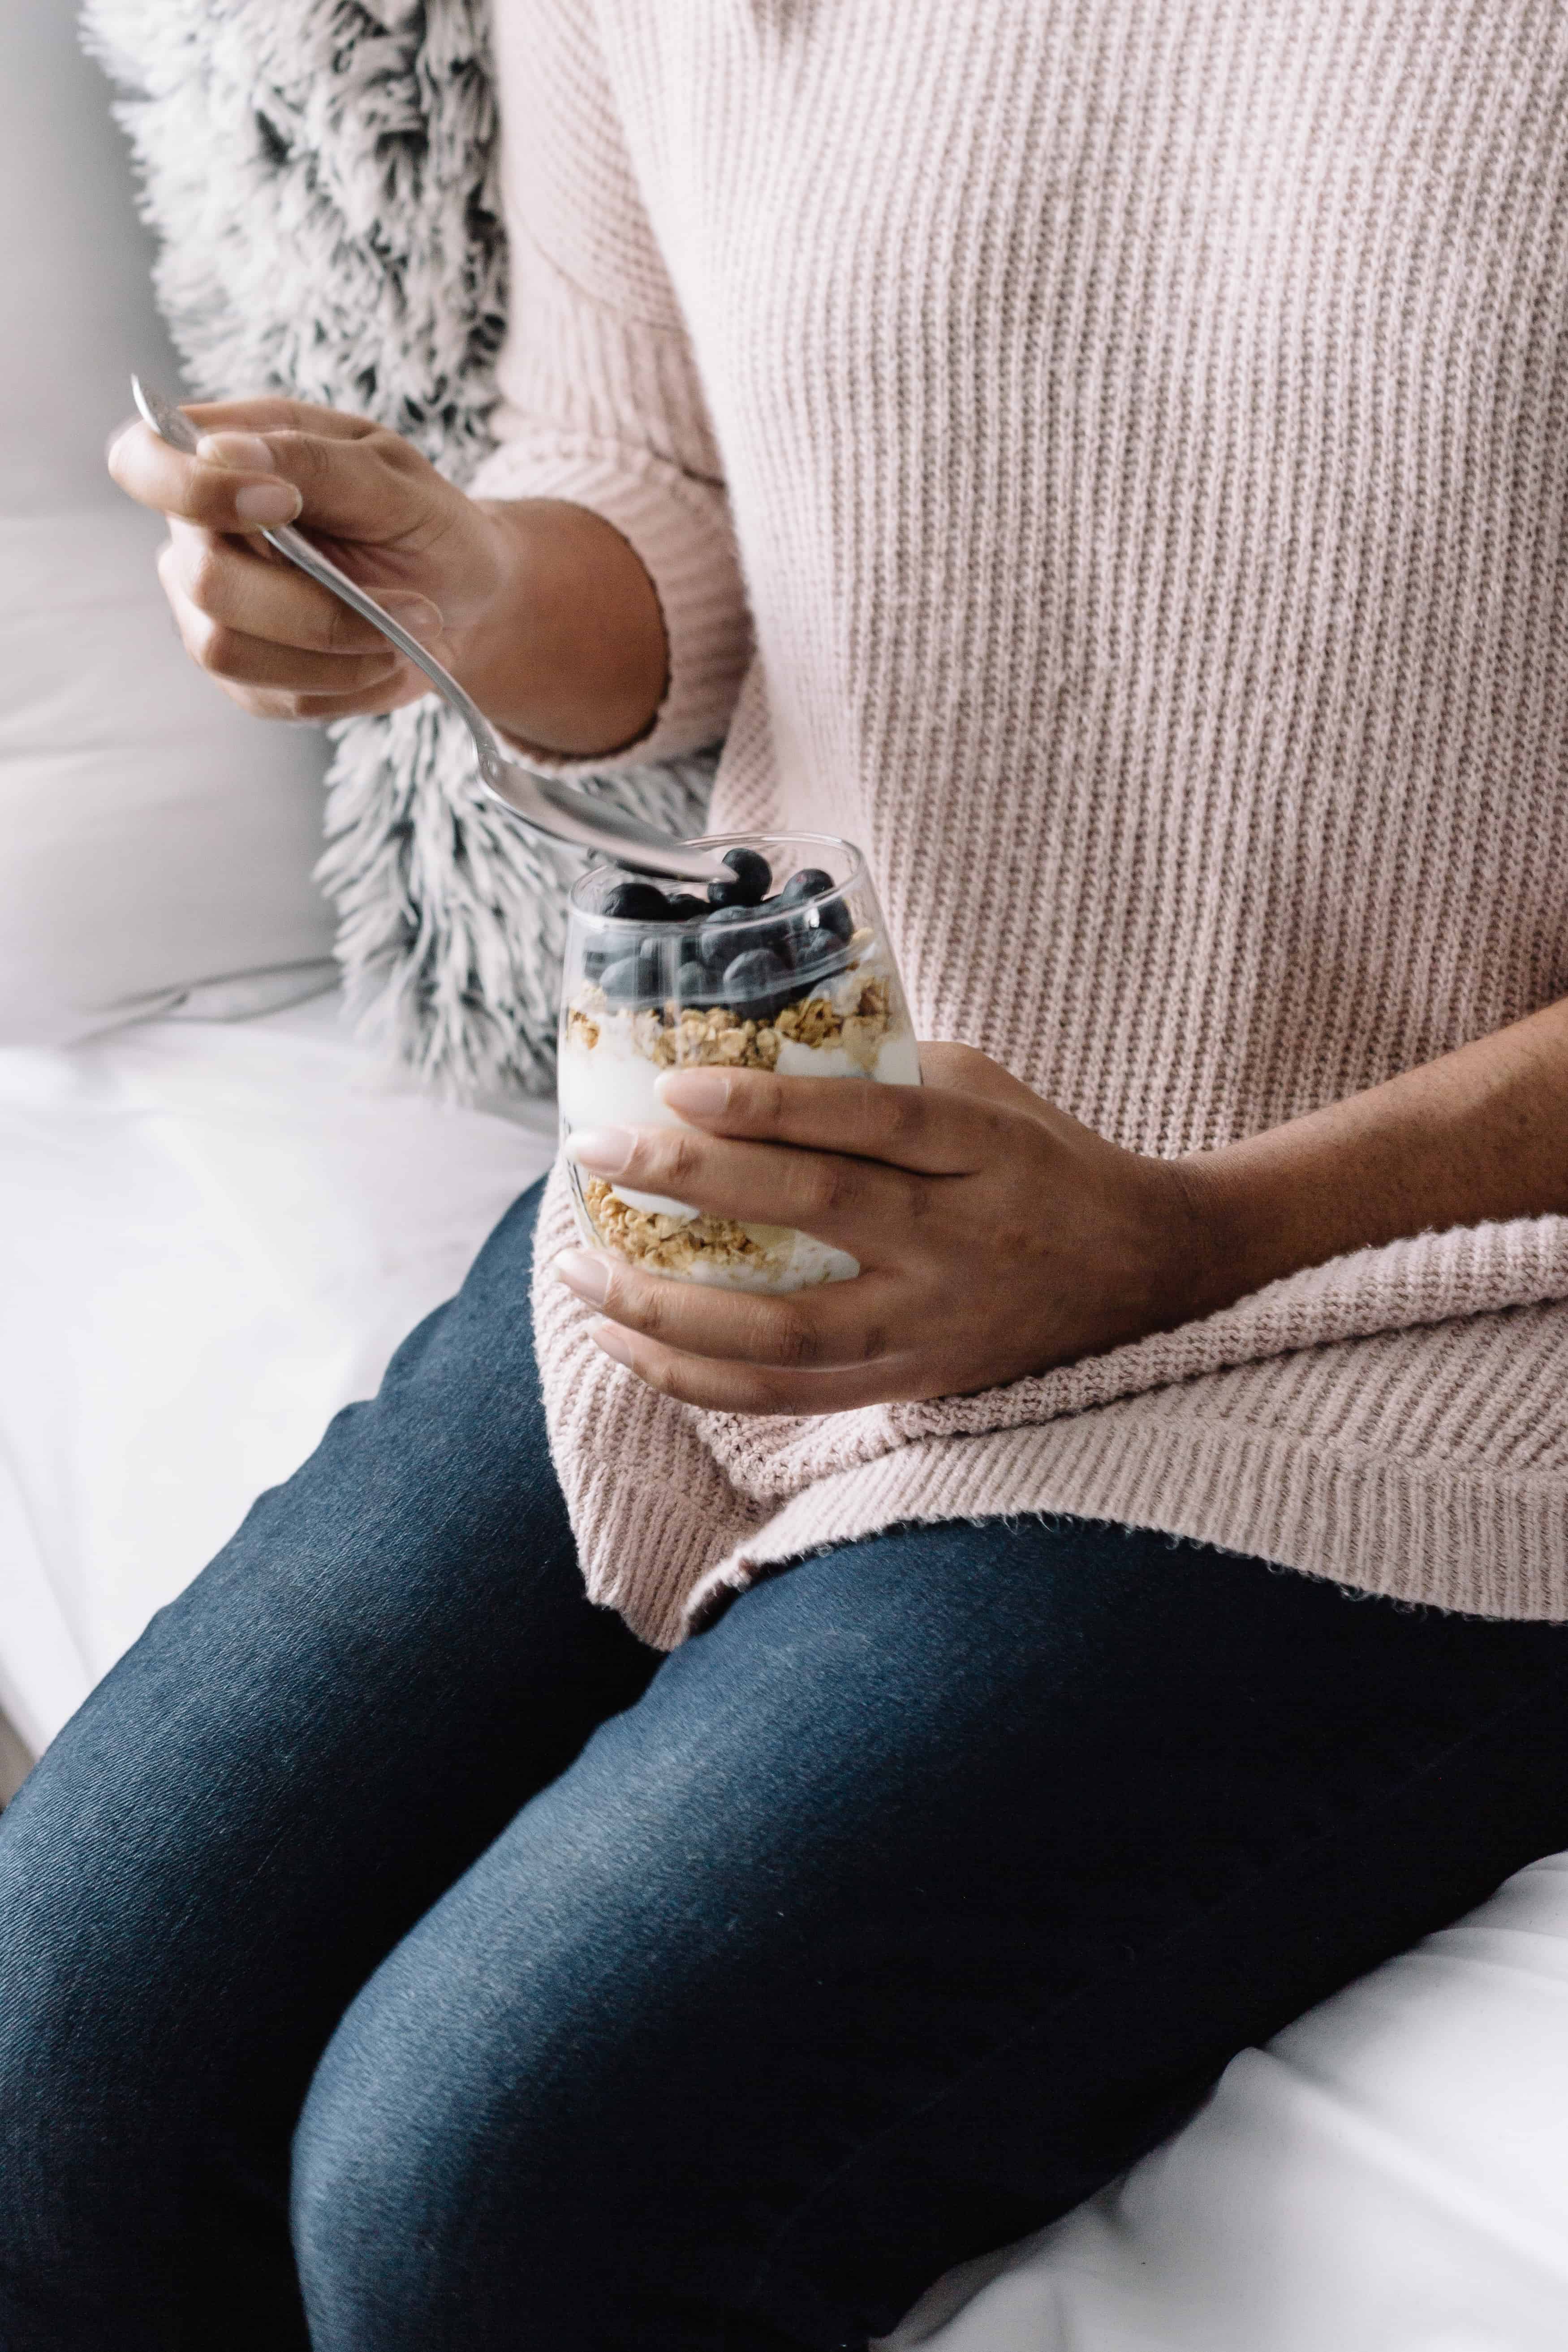 This Blueberry Yogurt Parfait is the perfect #blueberrybreak to enjoy when the holiday season is bringing you a lot of stress. I mean seriously….how can you go wrong when you have a snack that looks like this? // #sponsored @BlueberryLife @SIMPLY